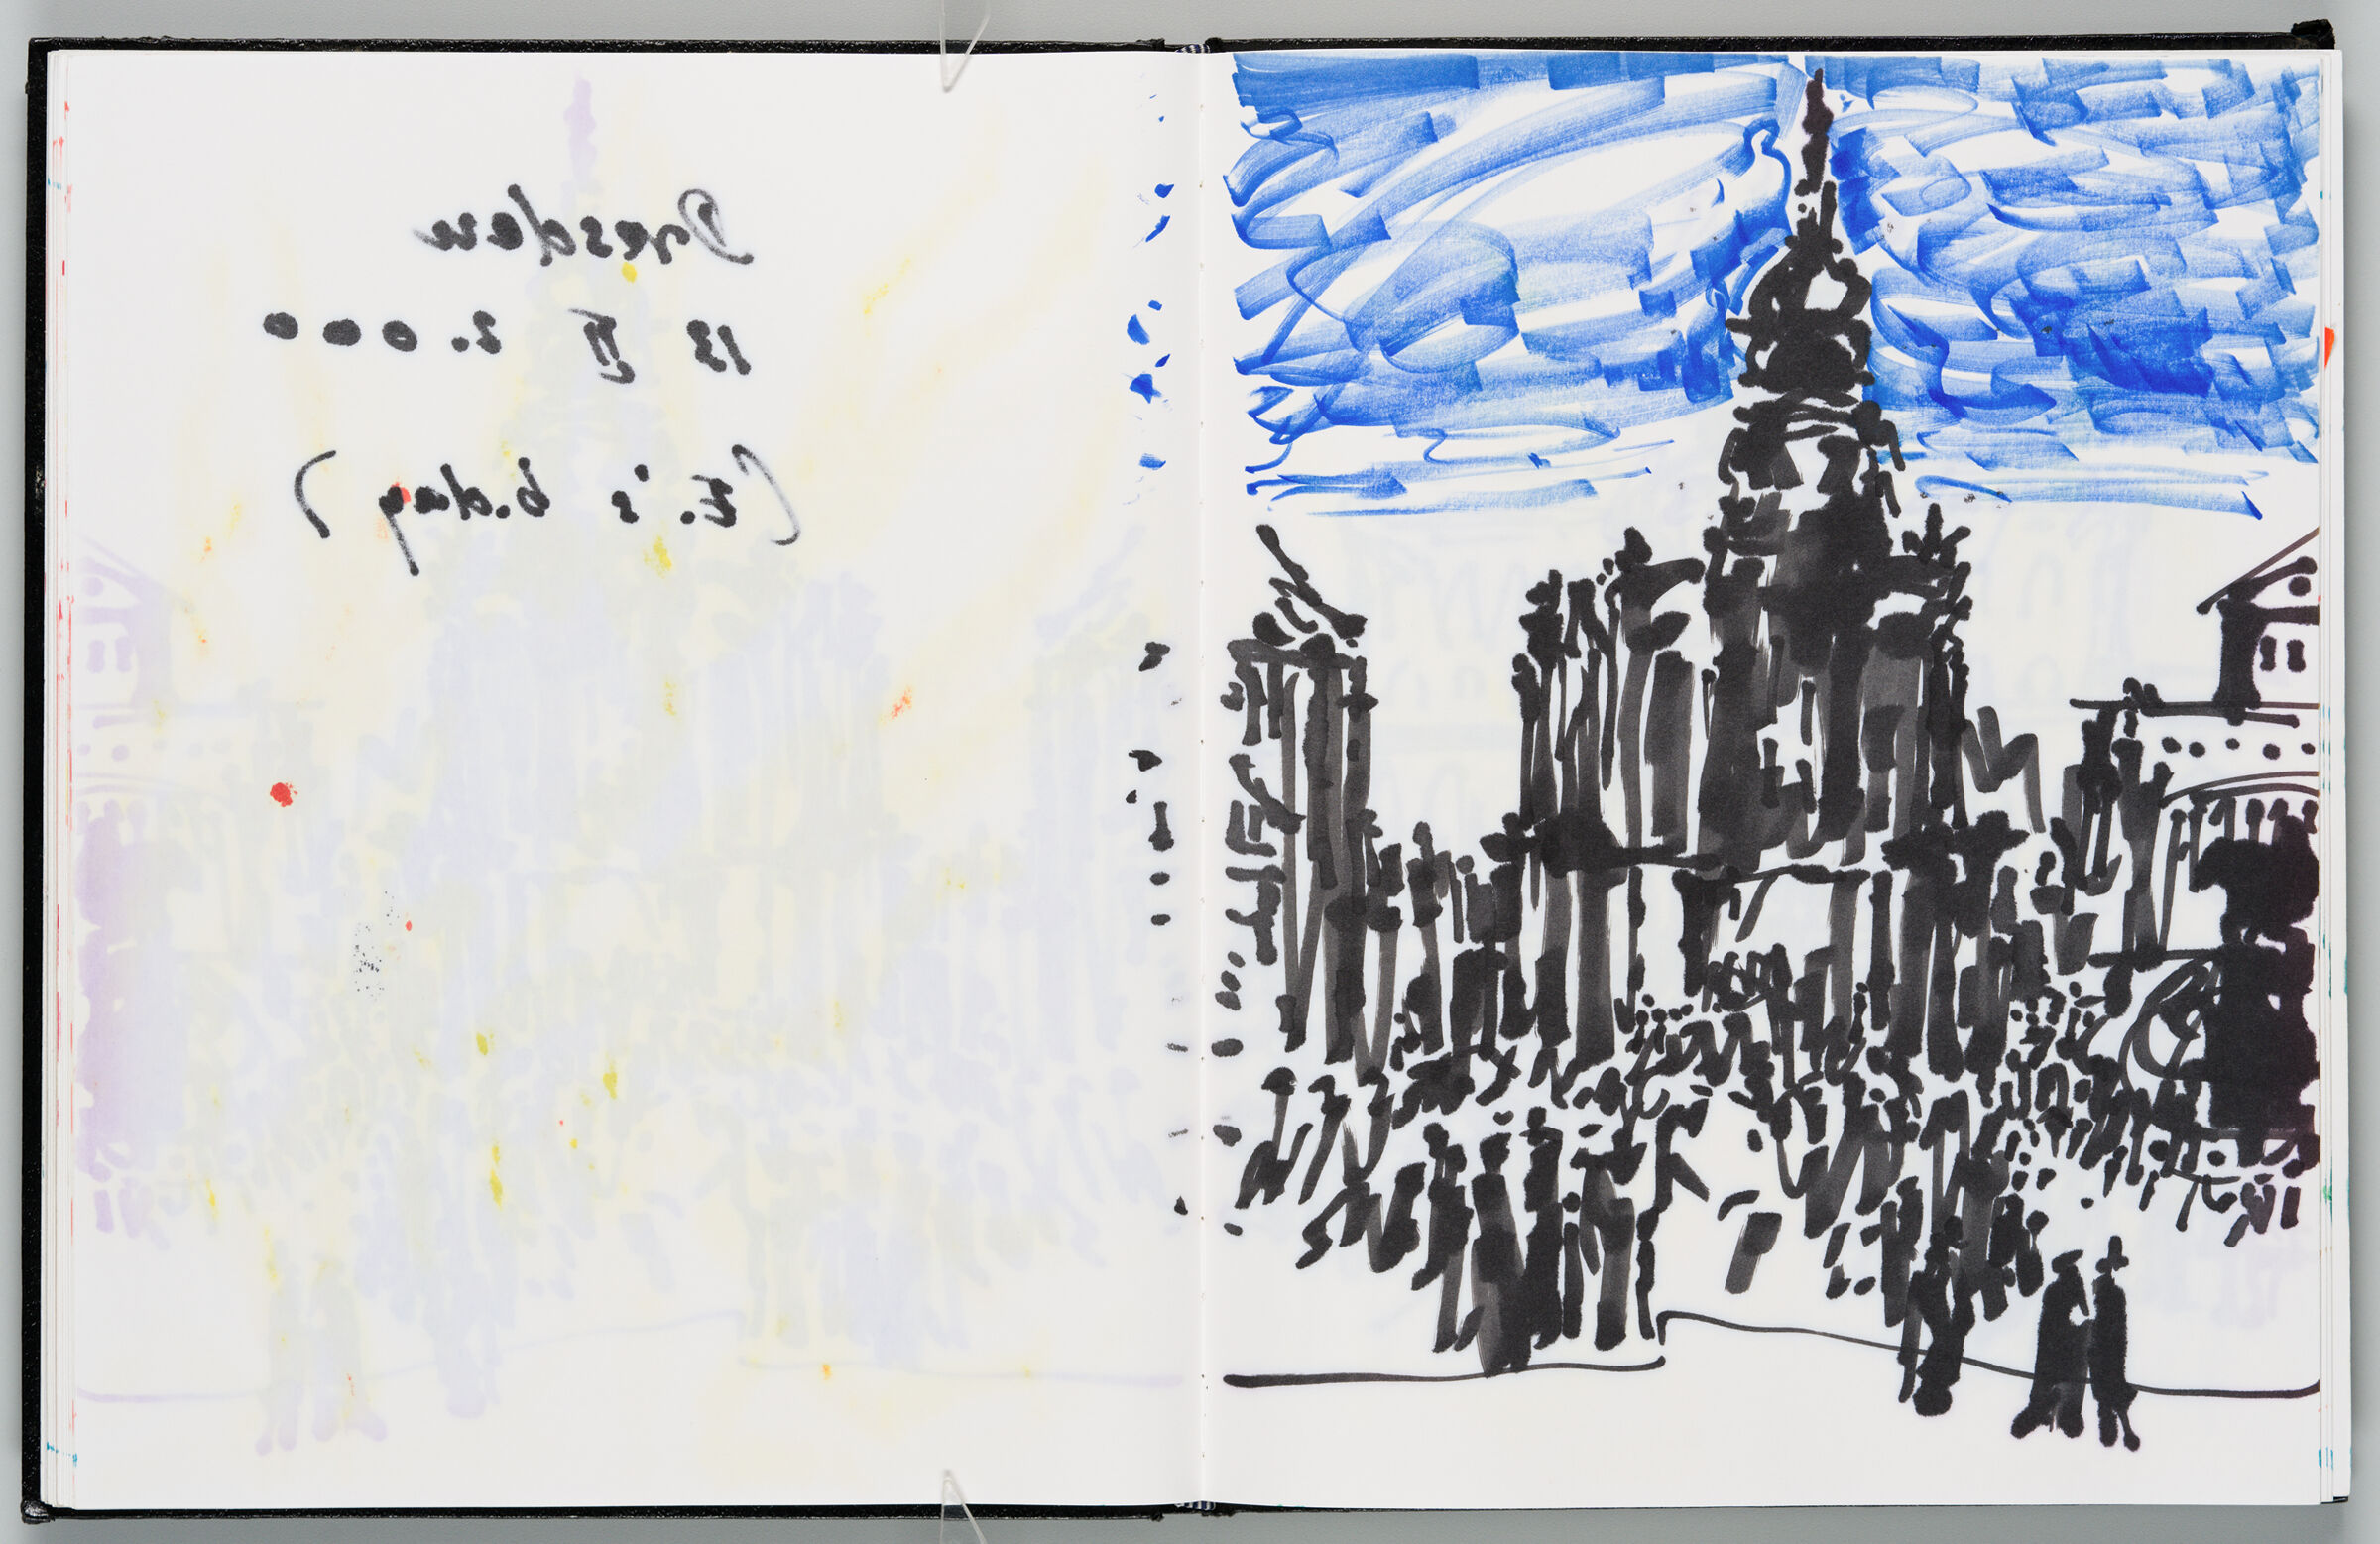 Untitled (Bleed-Through Of Previous Page And Color Transfer, Left Page); Untitled (View Of Dresden, Right Page)